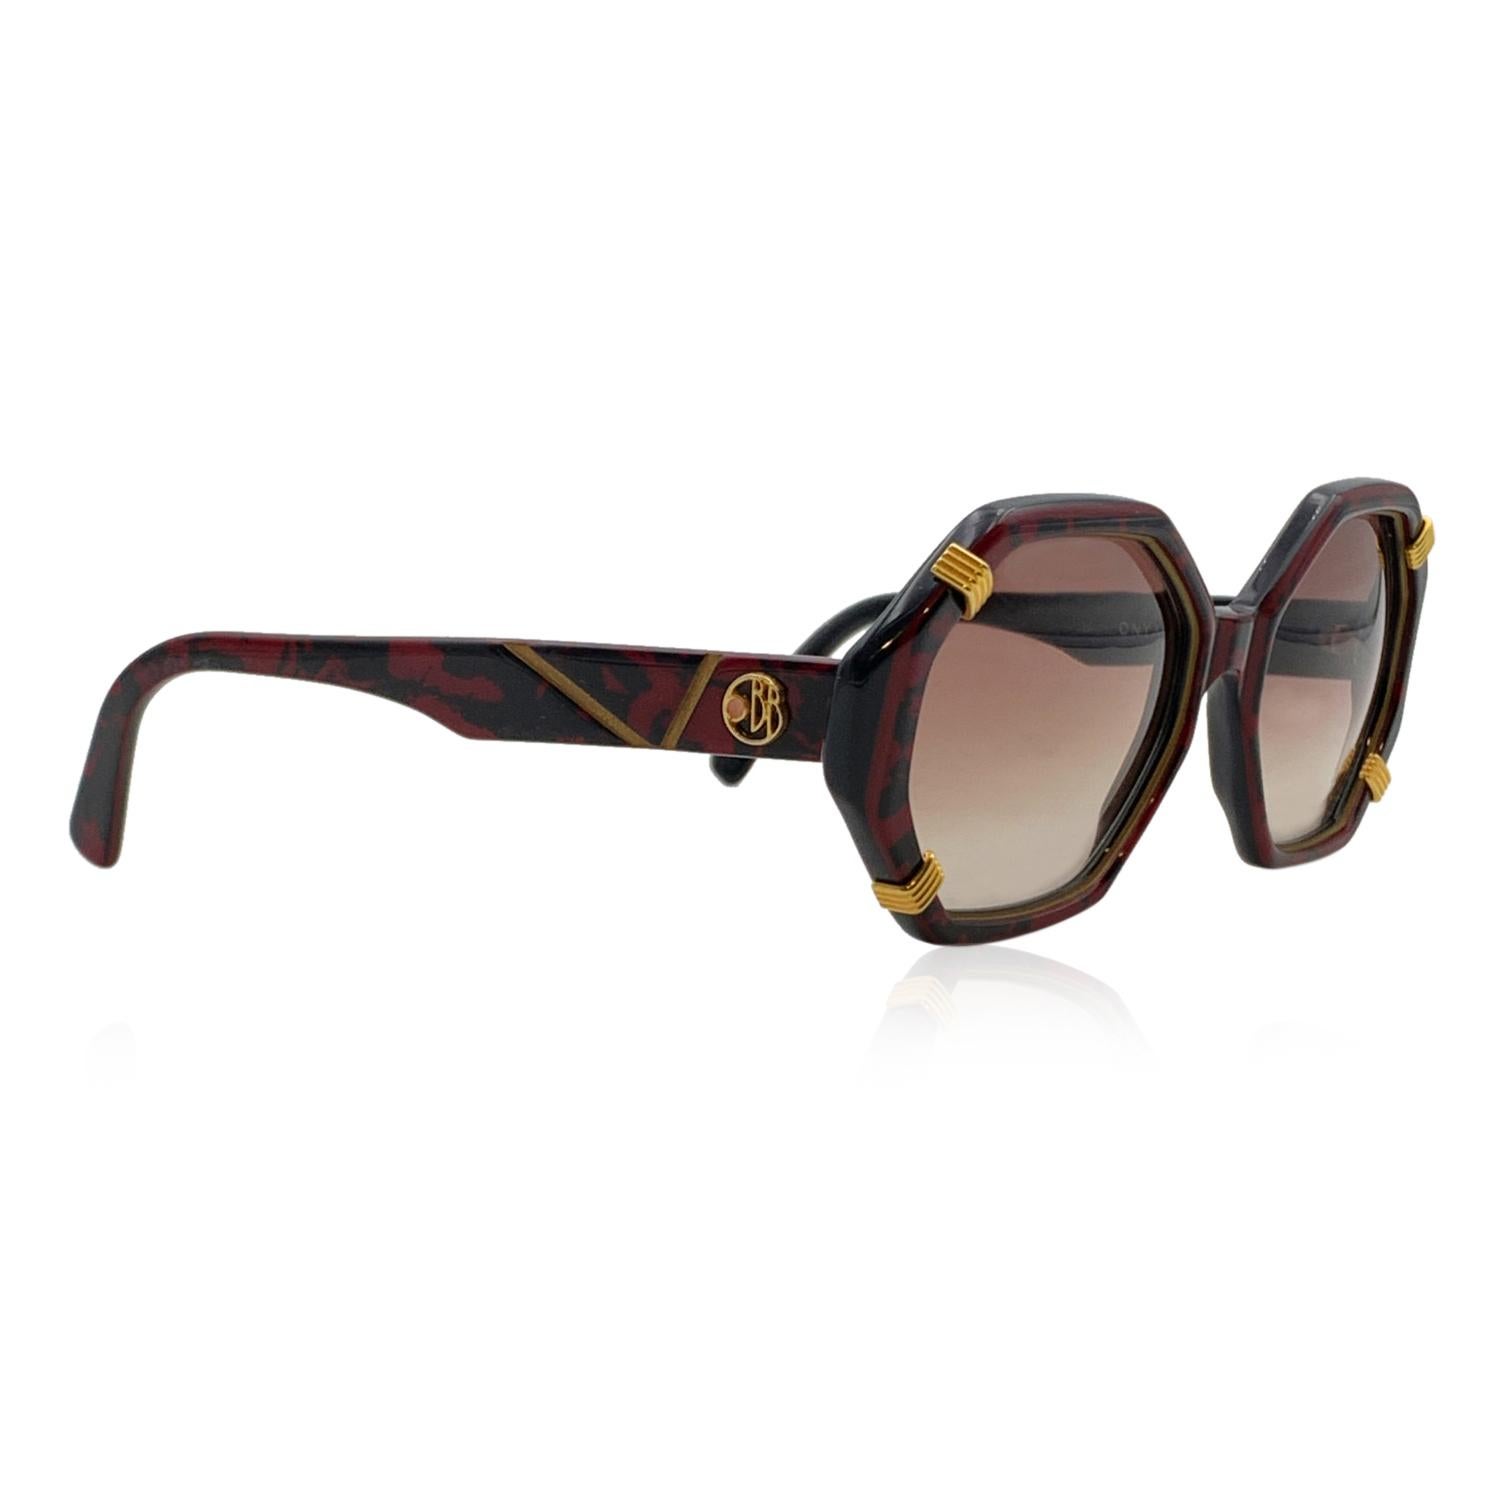 Beautiful Brigitte Bardot sunglasses from the 1970s, mod. Onyx CS 59. Beautiful black and burgundy acetate octagonal frame. Gradient brown lenses. Gold metal BB logo on temples and on the left part of the lens. Hand Made in